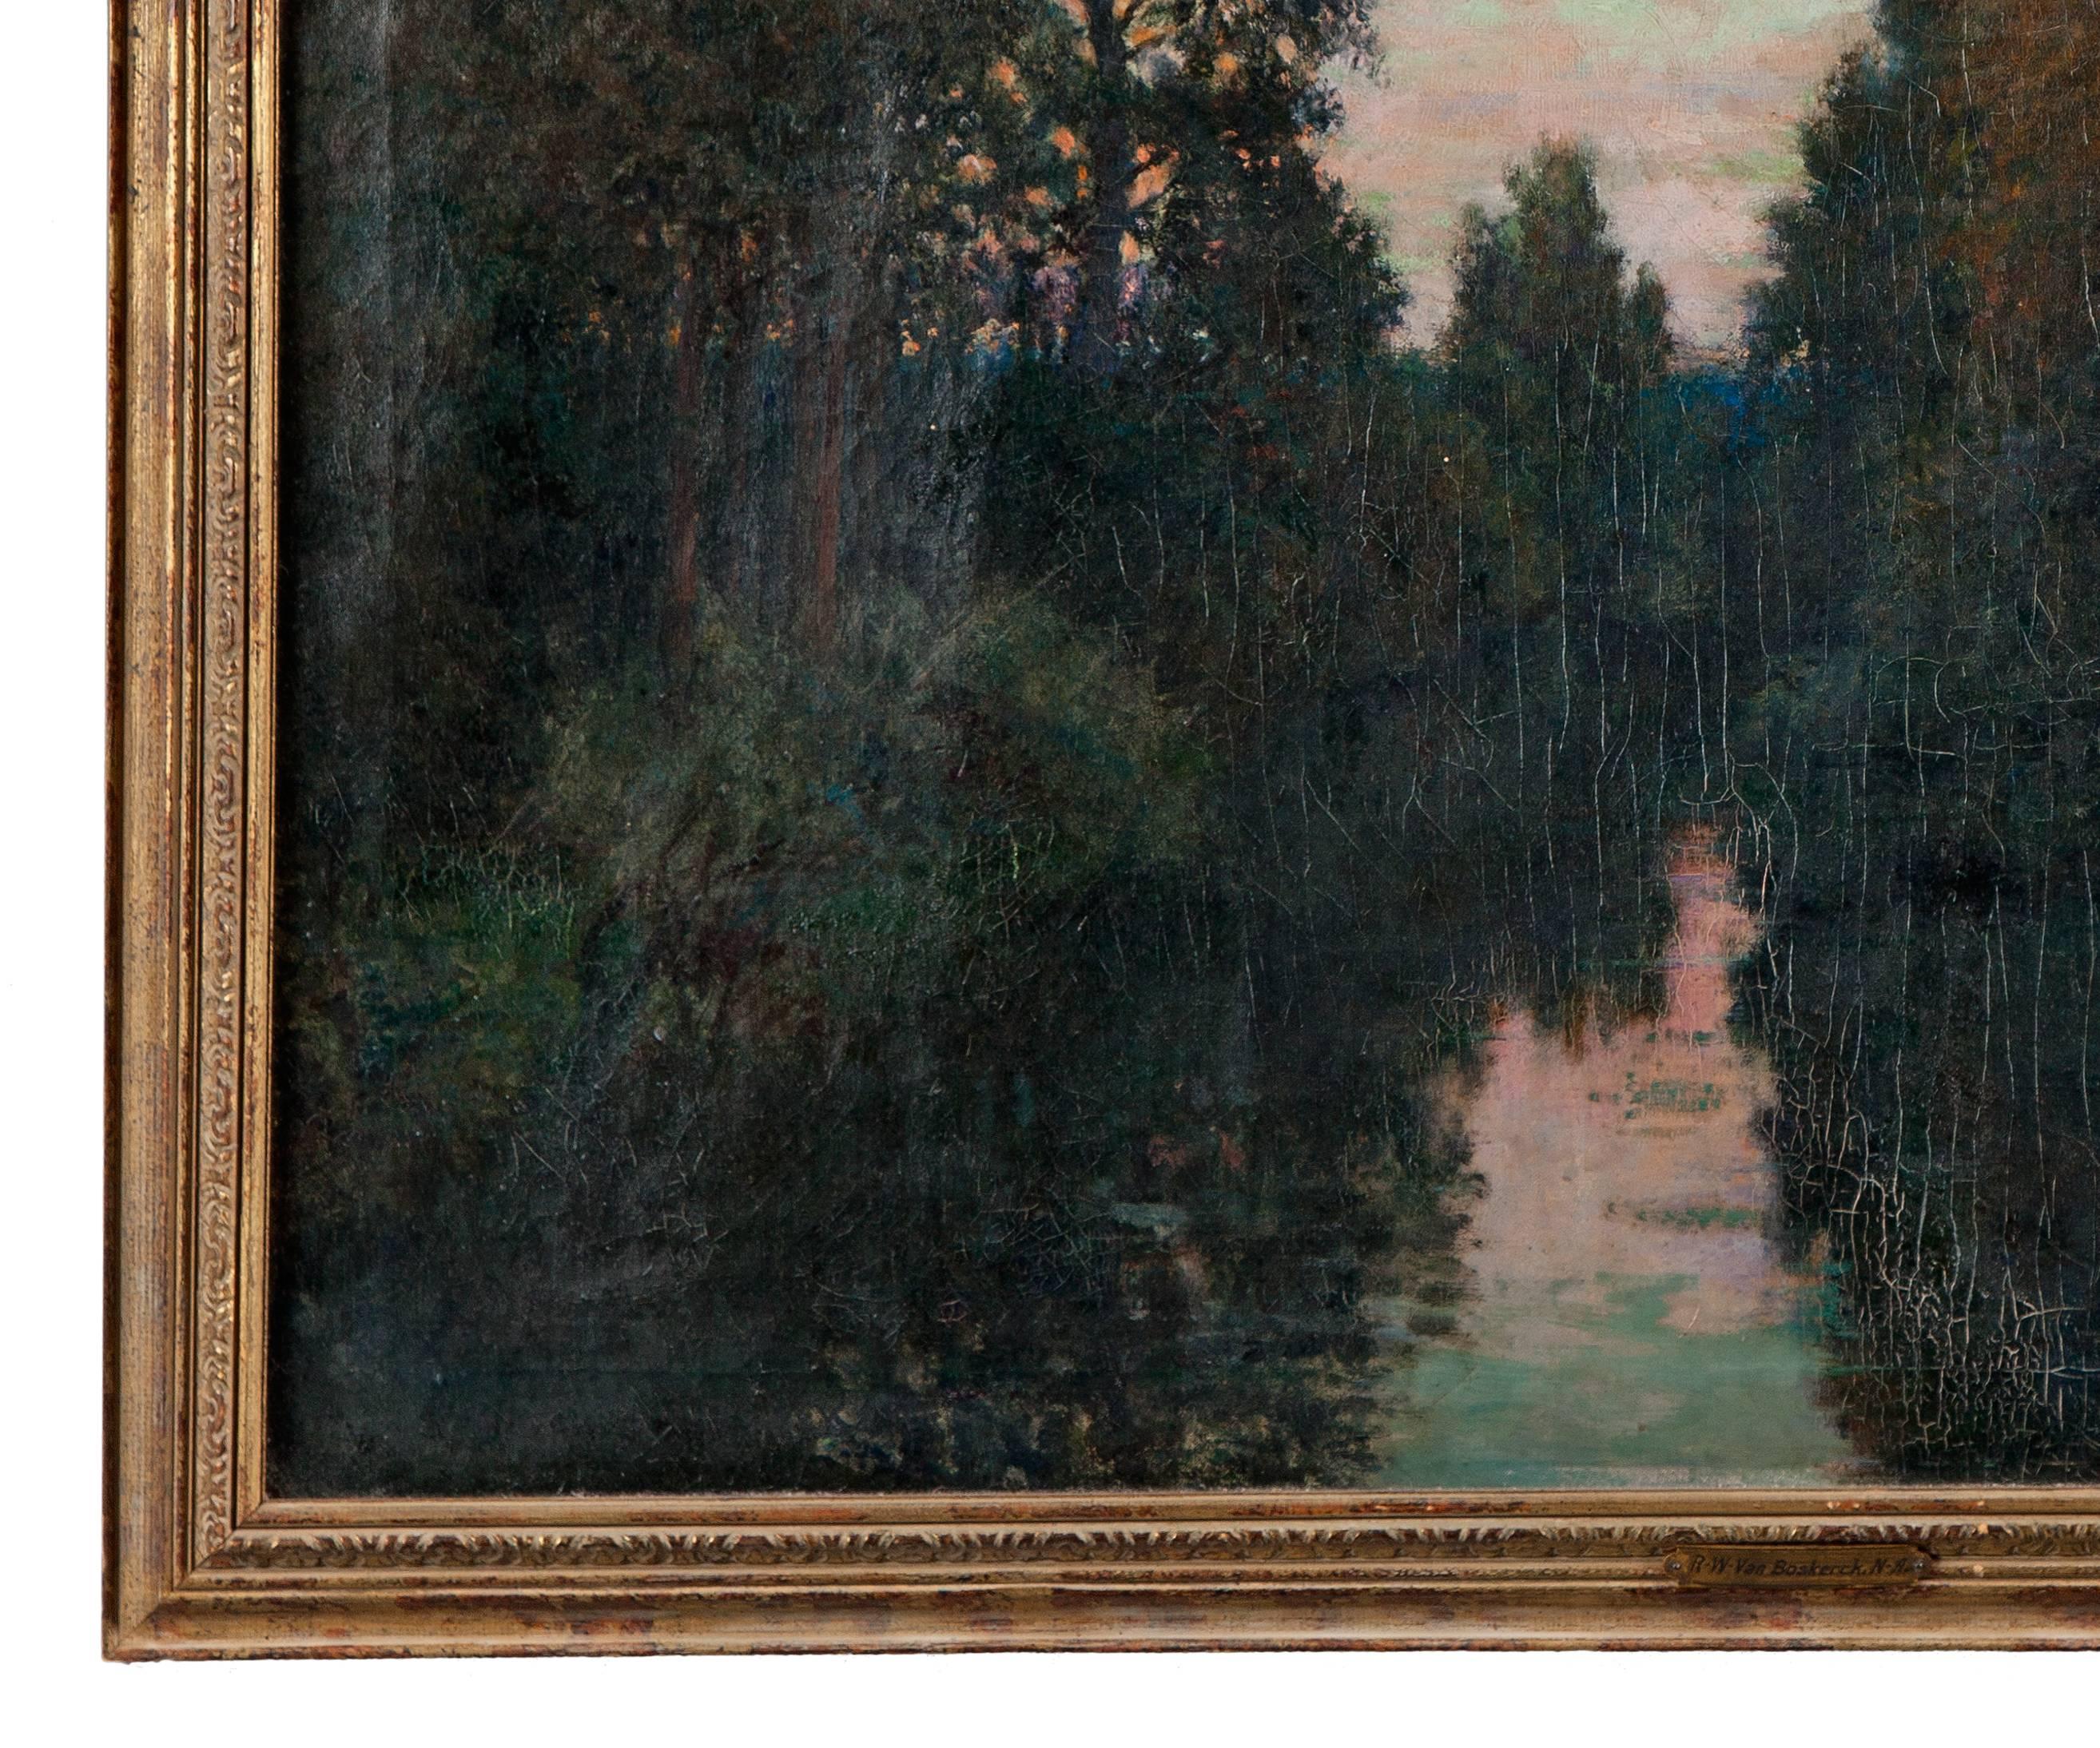 An oil on canvas painting of the 'Twilight on the River' by artist Robert Ward Van Boskerck (1855-1932). An American Impressionist who studied at the National Academy of Design. The sight size measures 31.5 inches high by 39.5 inches wide and the